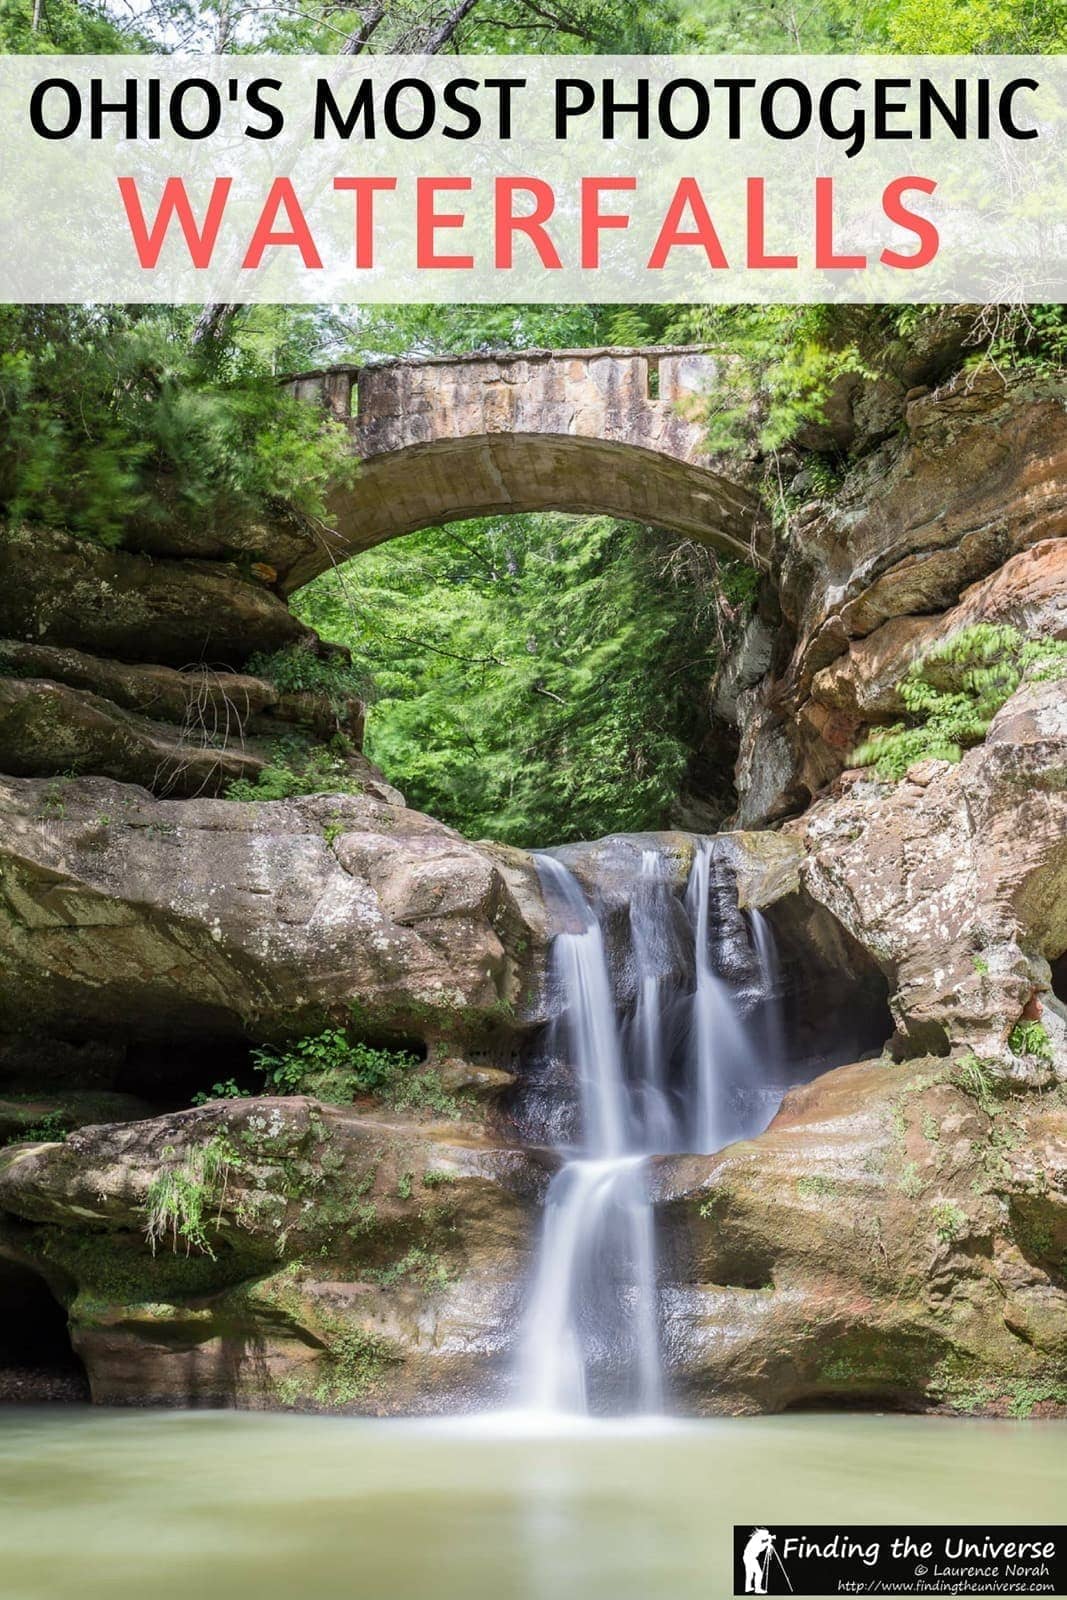 A guide to the most photogenic waterfalls in Ohio, plus tips and advice on taking waterfall photos